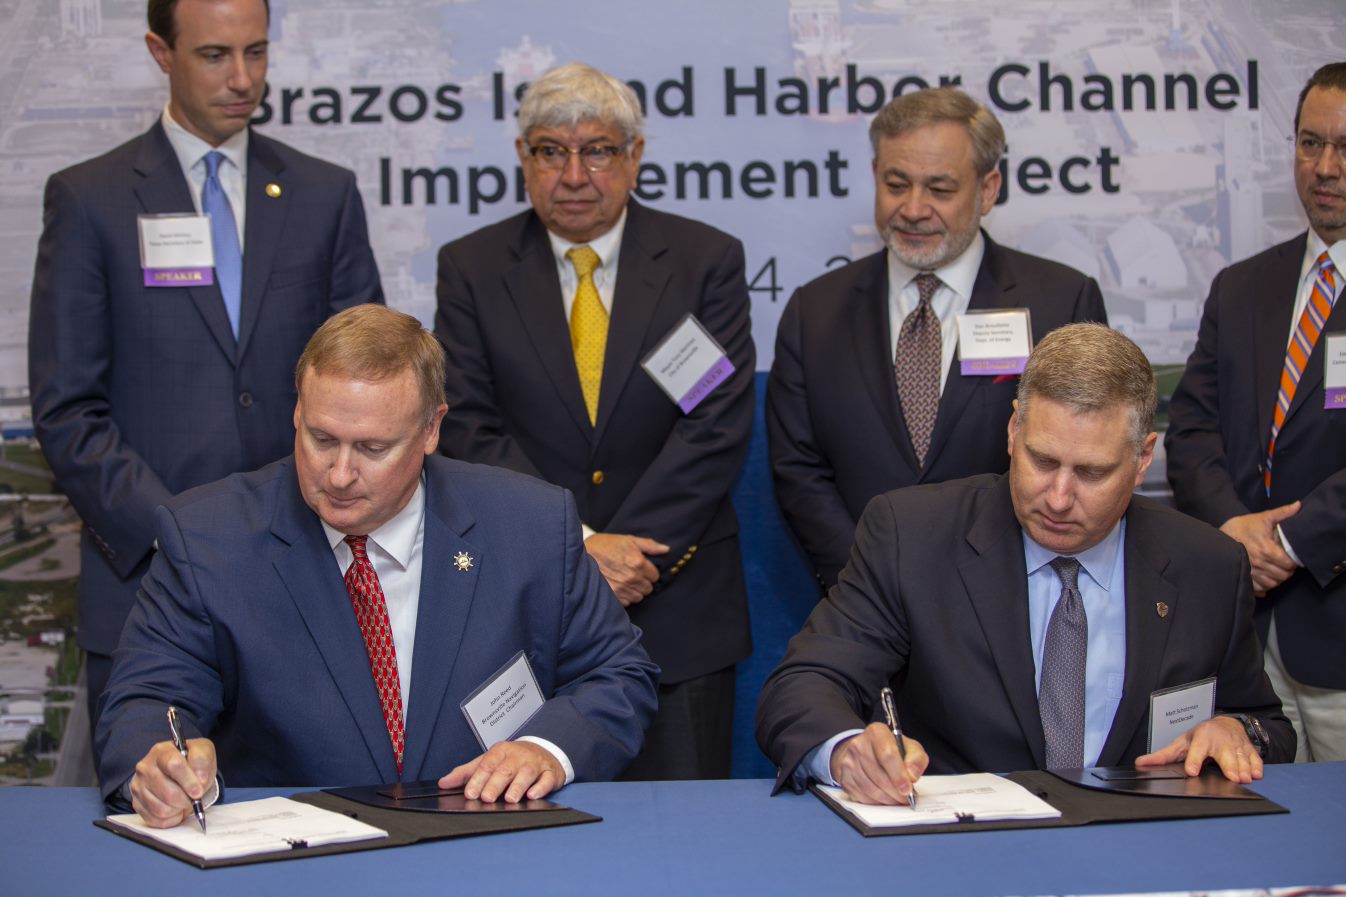 NextDecade in the News: KVEO Rio Grande Valley covers Brazos Island Harbor Project Funding Agreeement Signing Ceremony